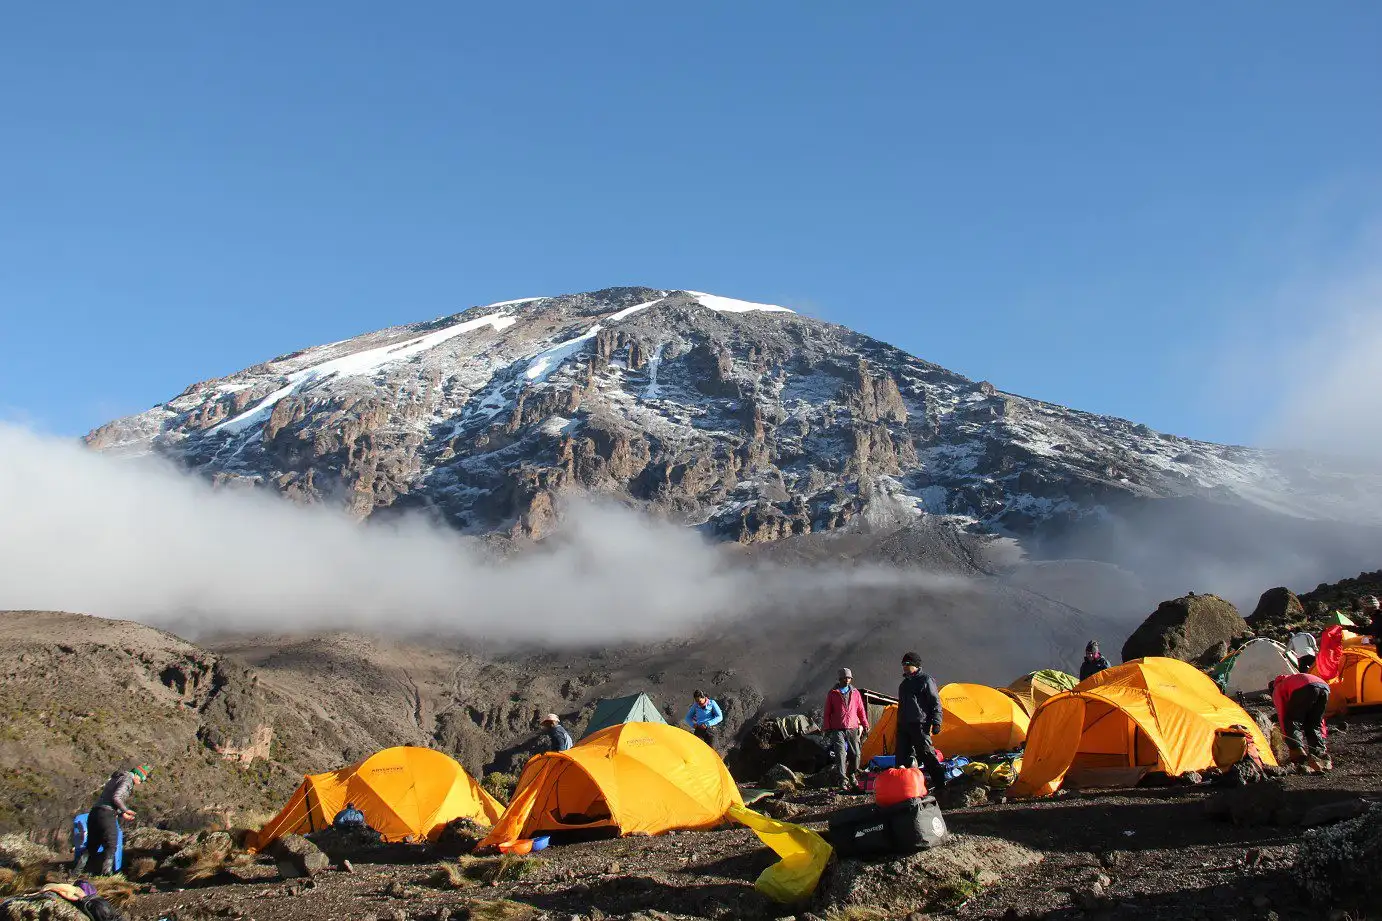 Lemosho Route 7 days Itinerary, Prices & Dates, What Is The Best Down Jacket For Climbing Kilimanjaro? 10 Reasons Why You Can't Climb Mt Kilimanjaro in a Day, Kilimanjaro Experience | Highest Mountain in Africa, Oldest Person To Climb Kilimanjaro, Best Tour Operators in Tanzania, 6 Days Shira route, How high is Mount Kilimanjaro? Everything you need to know, The 10 Biggest Misconceptions About Climbing Kilimanjaro, Do I Need a Camp Pillow for Climbing Kilimanjaro, Kilimanjaro Climb and Safari Packages, How To Prepare For Climbing Mount Kilimanjaro, Food on Kilimanjaro, Which is Harder Inca Trail or Kilimanjaro? Kilimanjaro Inspiring Stories, Natural Foods and Supplements, Kilimanjaro Books That Transport You To The Roof Of Africa, Climbing Kilimanjaro in September, Why do prices differ between Kilimanjaro tour operators?